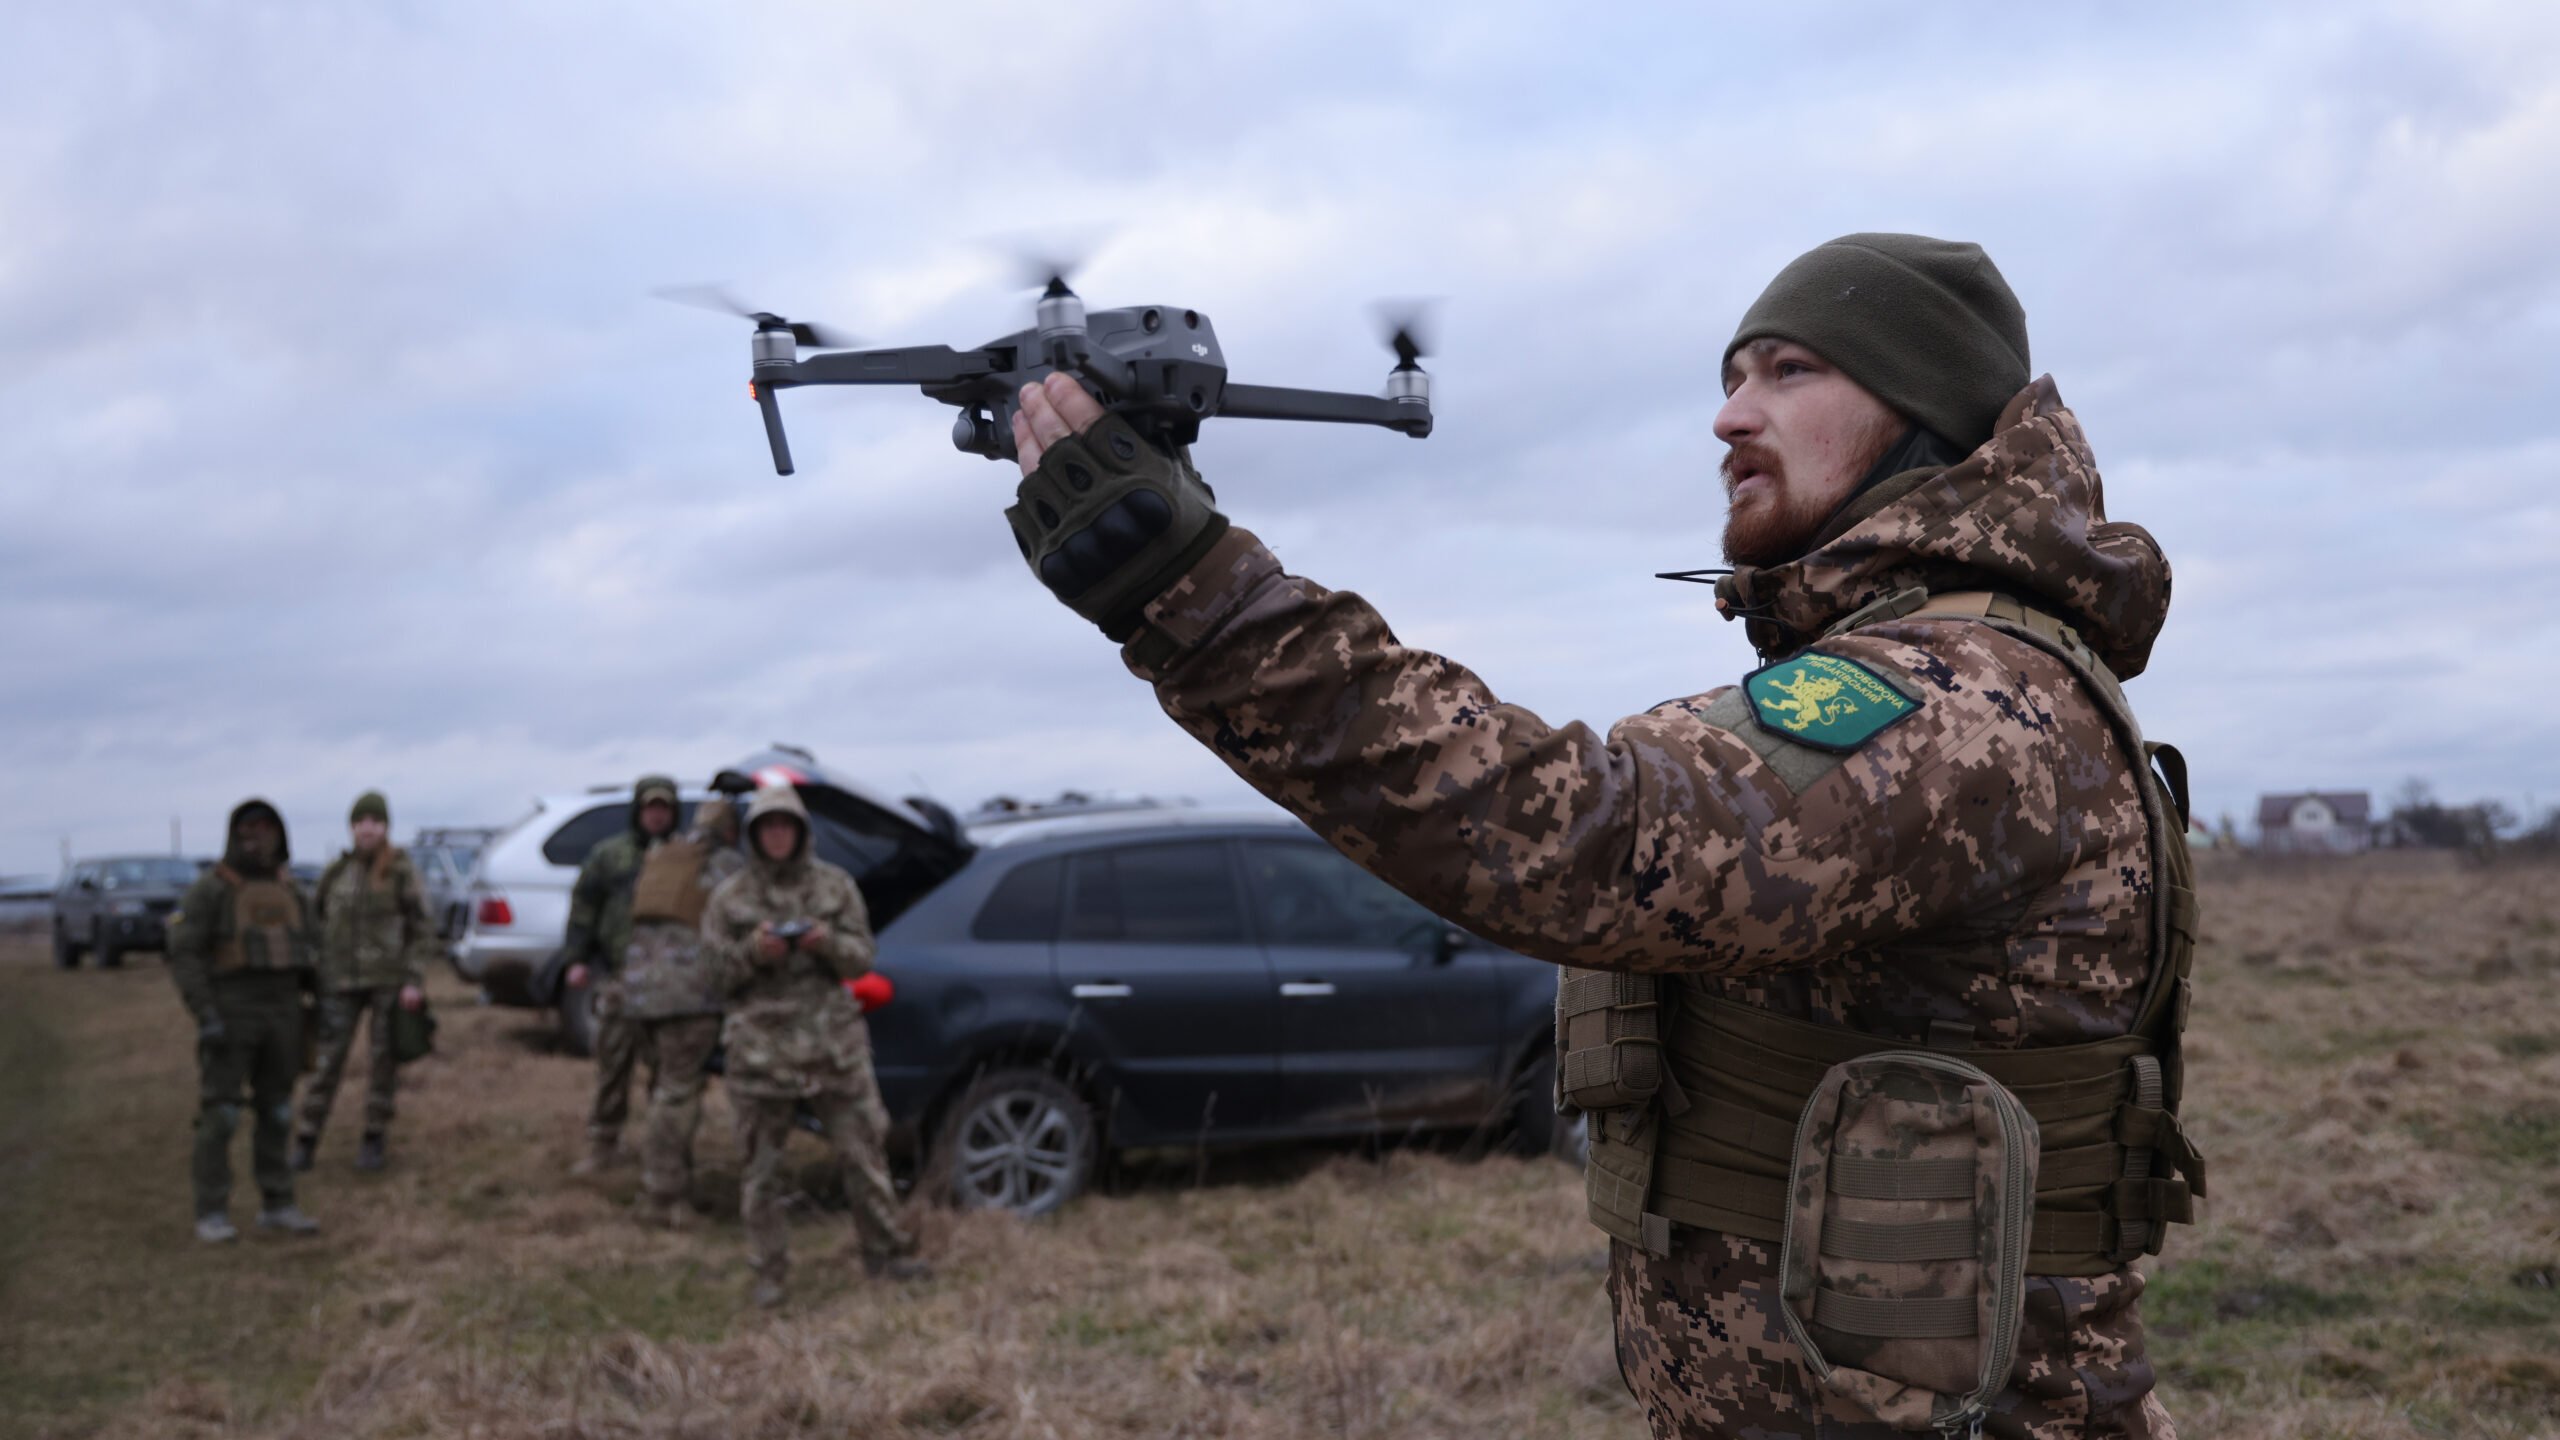 Dumb and cheap: When facing electronic warfare in Ukraine, small drones’ quantity is quality